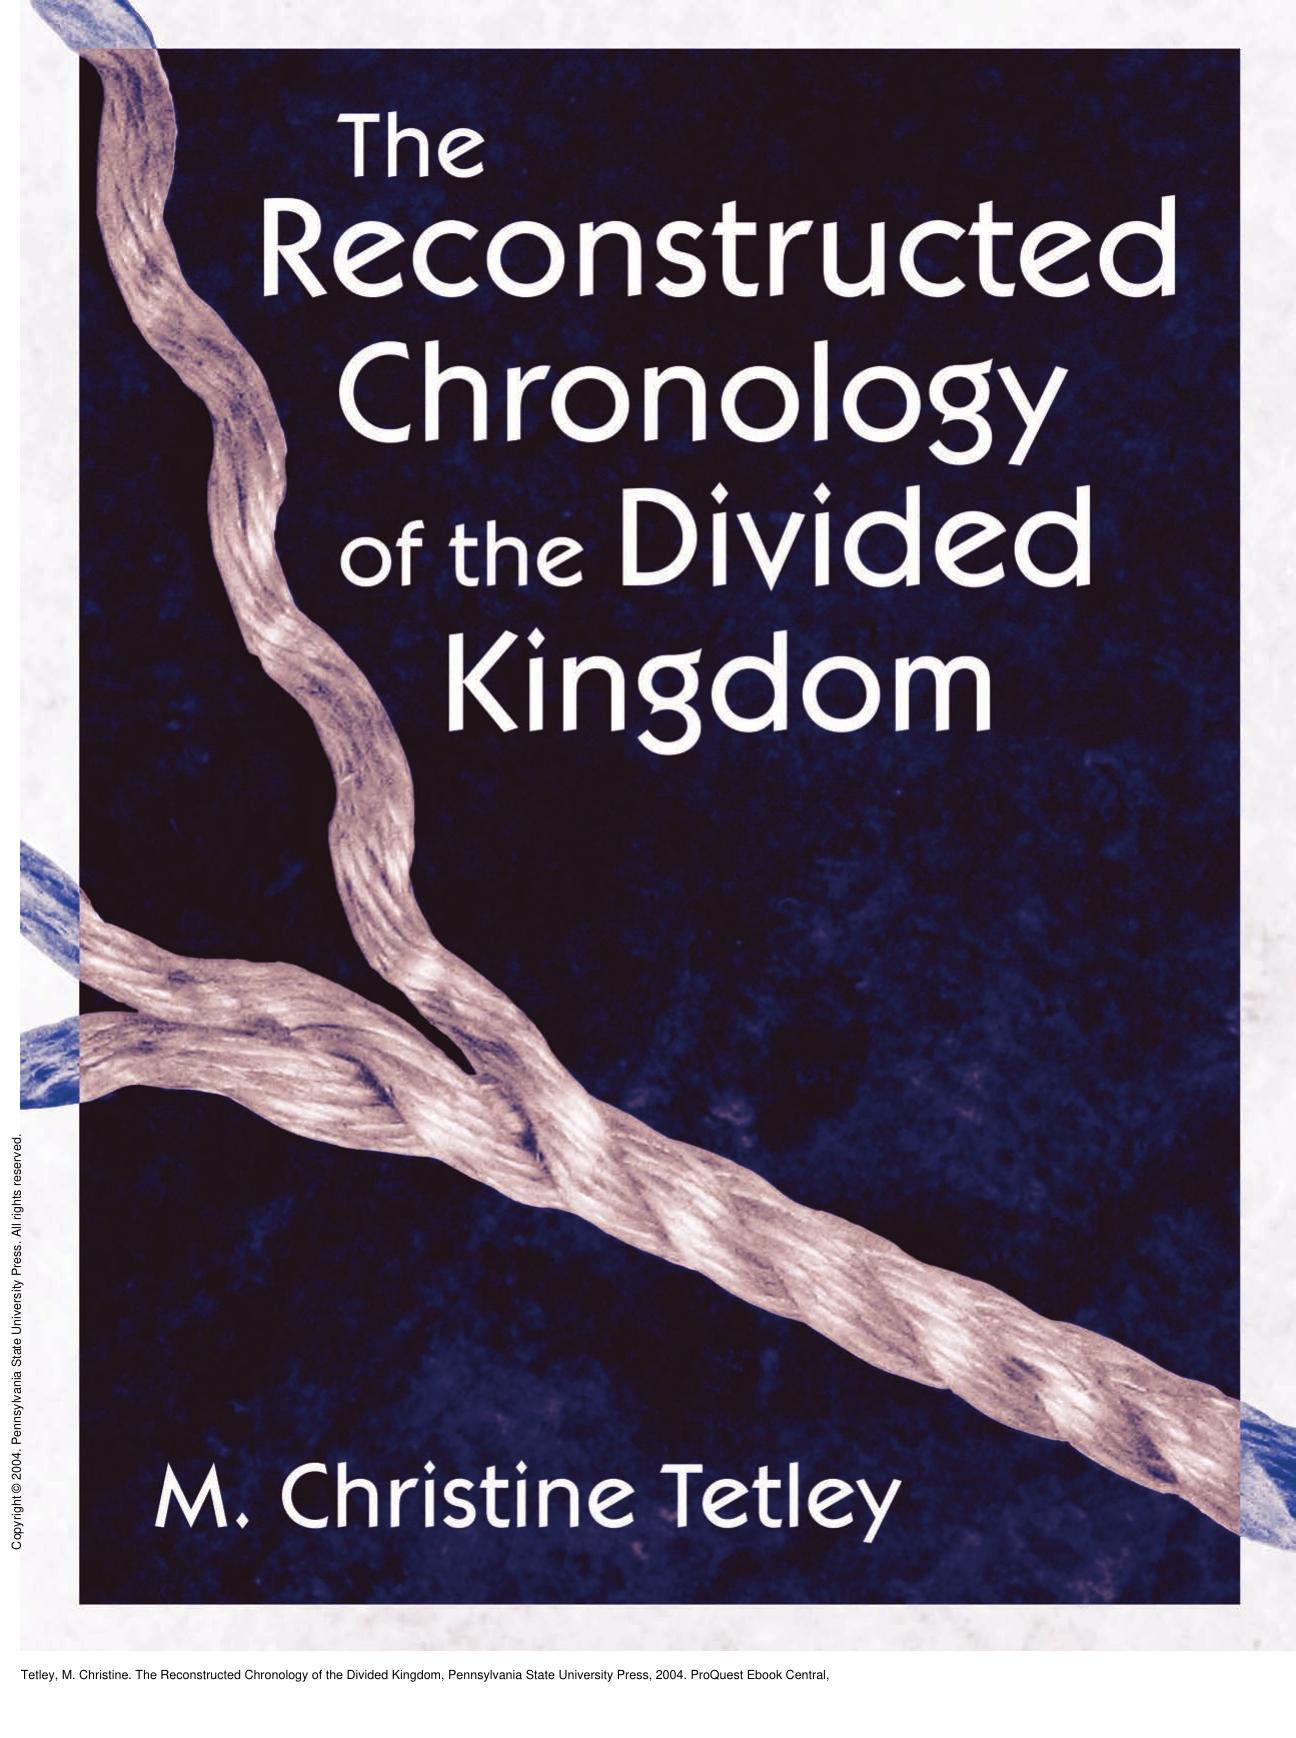 The Reconstructed Chronology of the Divided Kingdom by M. Christine Tetley